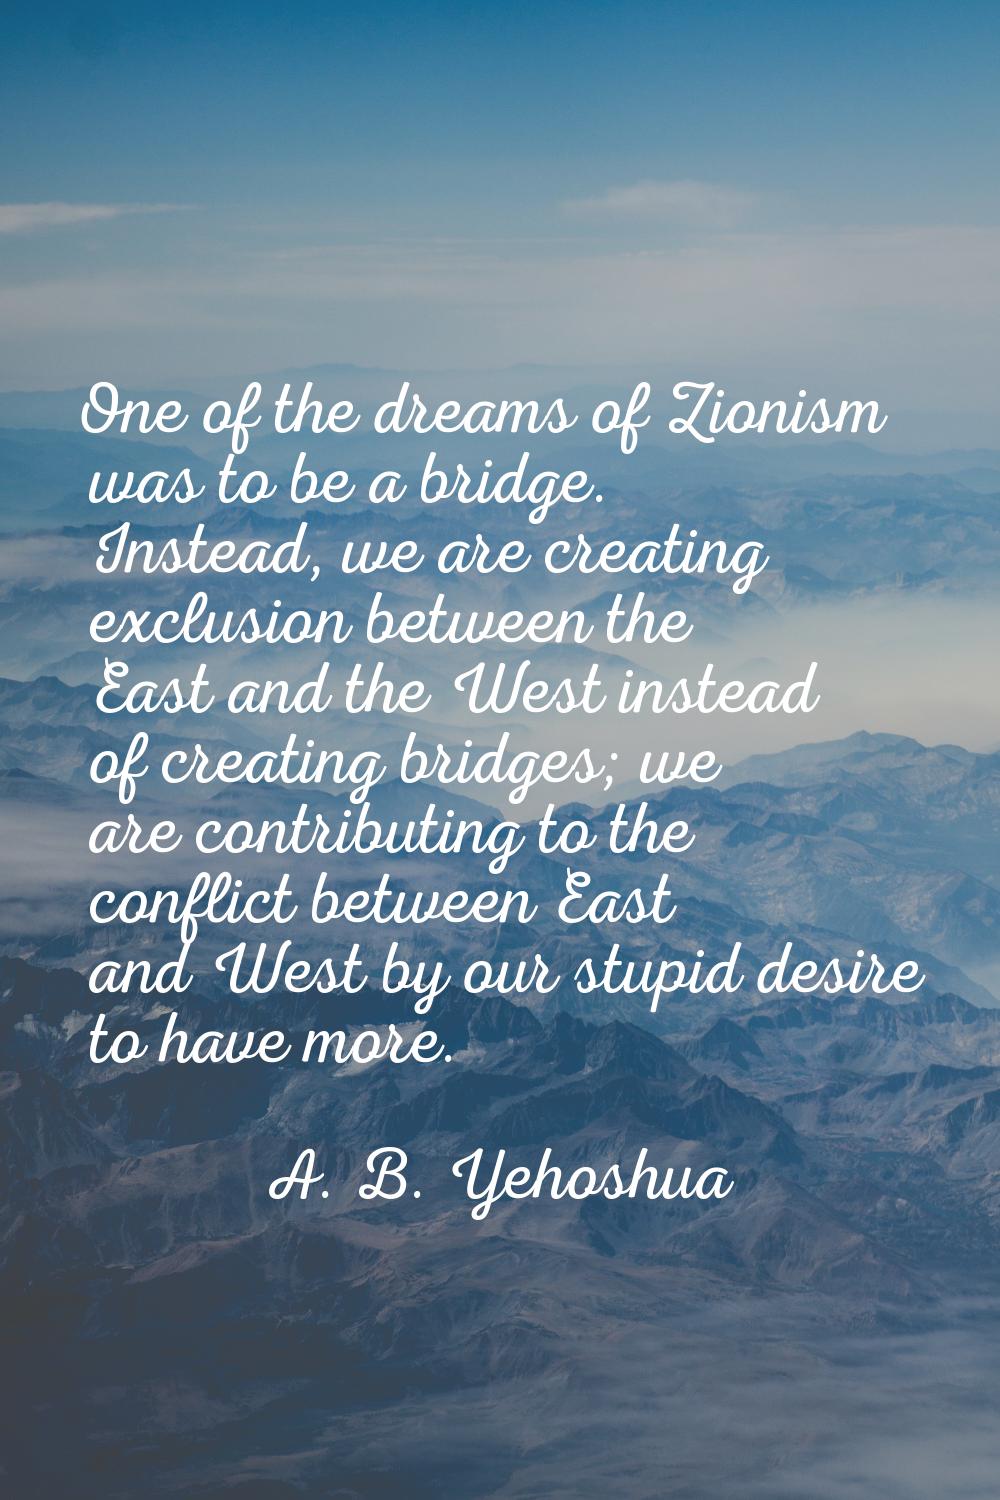 One of the dreams of Zionism was to be a bridge. Instead, we are creating exclusion between the Eas